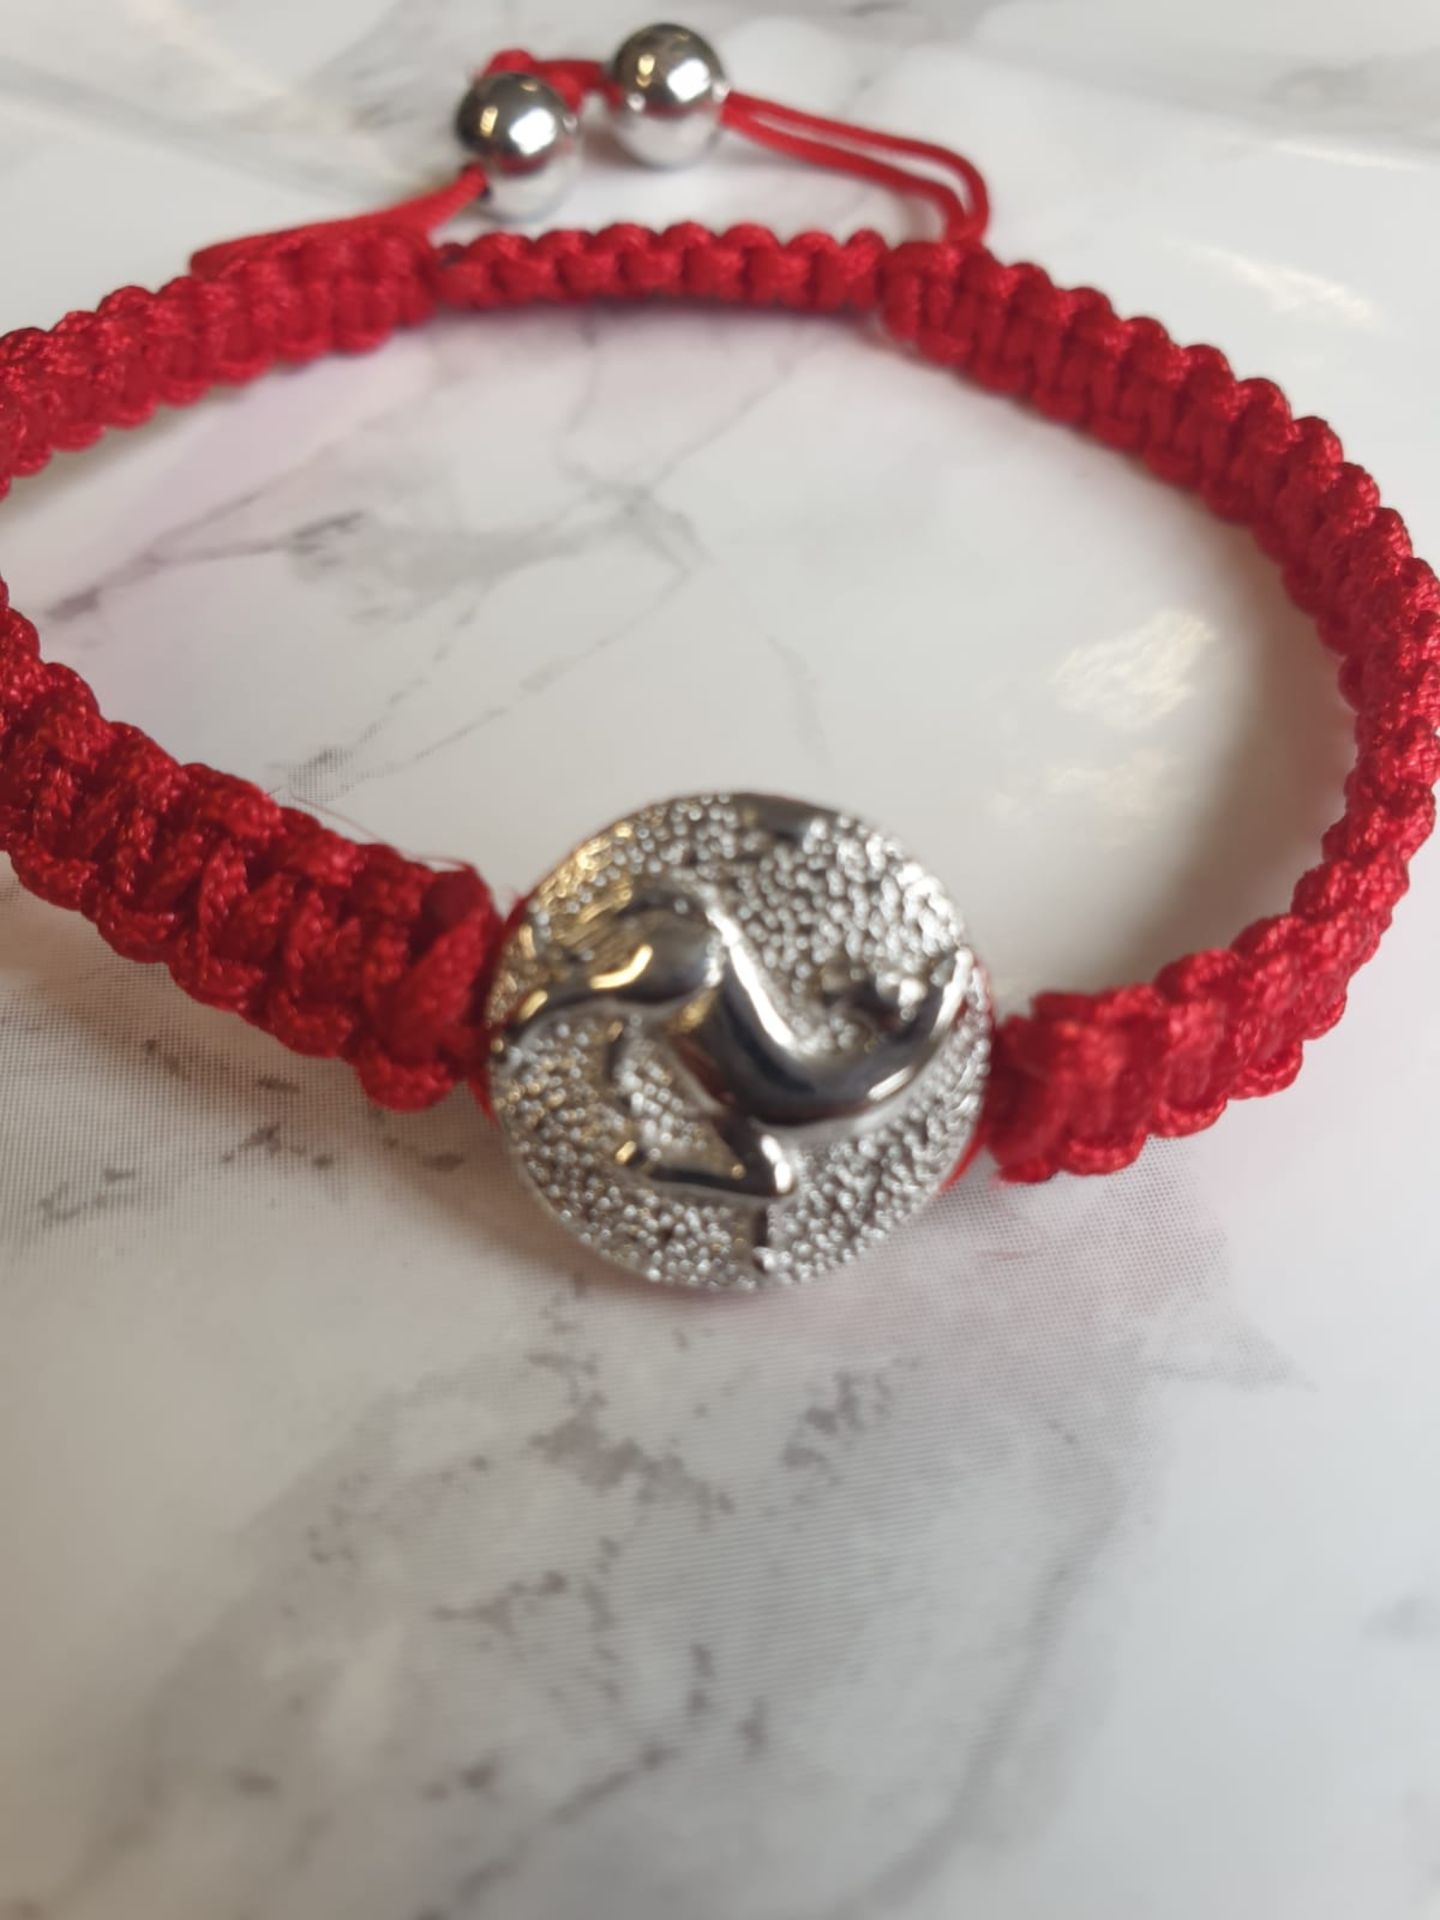 18 x Chinese Zodiac Animal Year Adjustable Beaded Bracelet Red Horse With Silver Bead Ends - Image 5 of 6